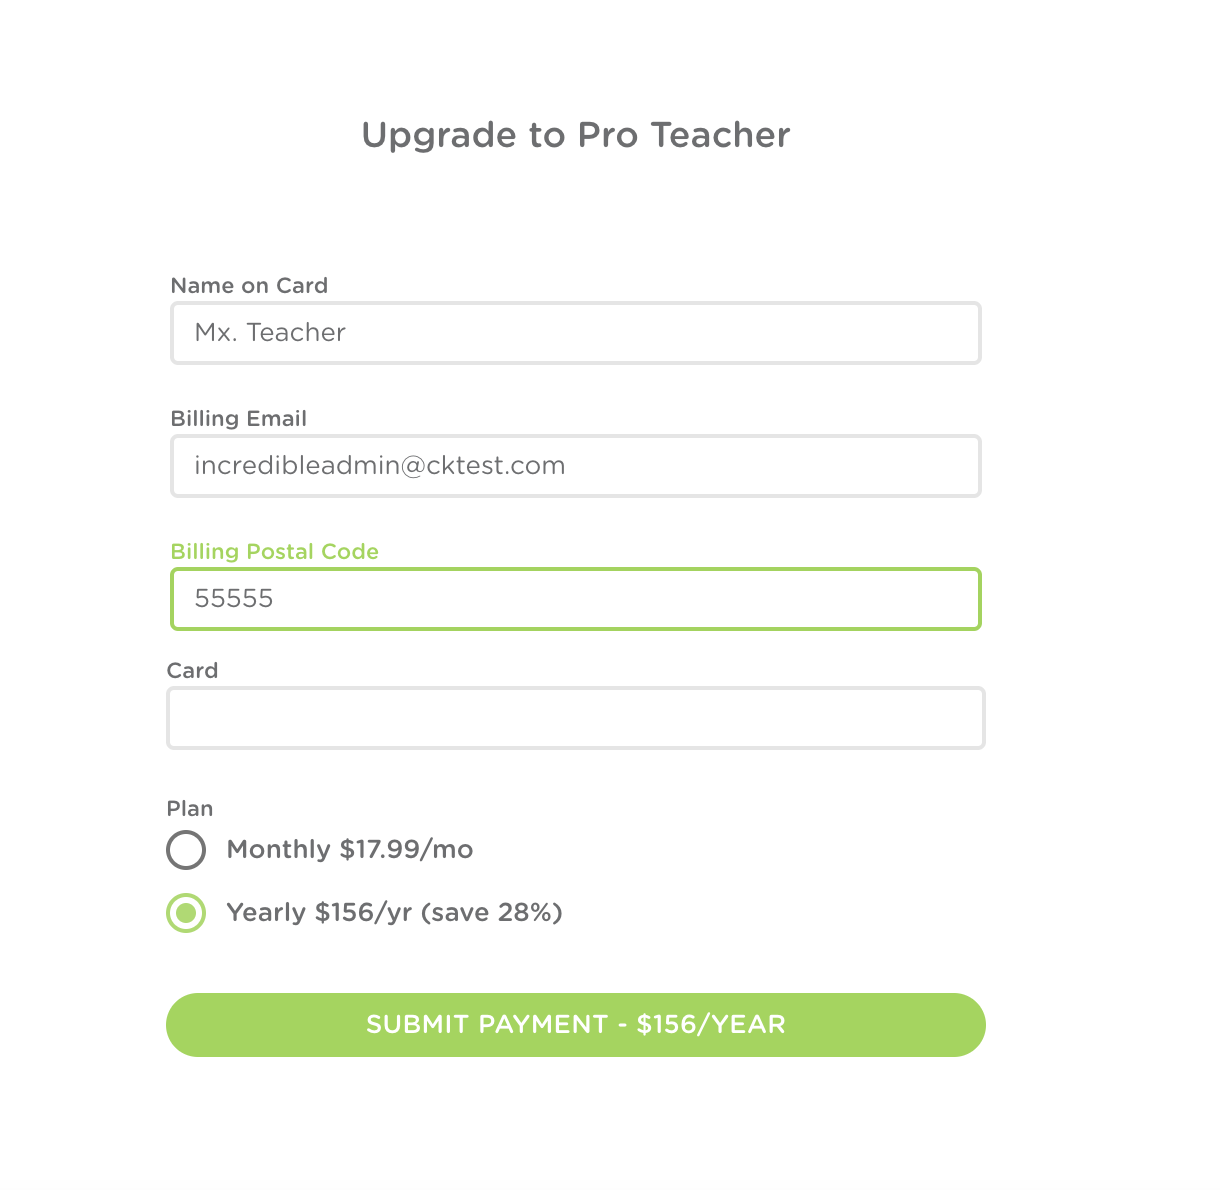 The tab to upgrade to a pro teacher subscription.